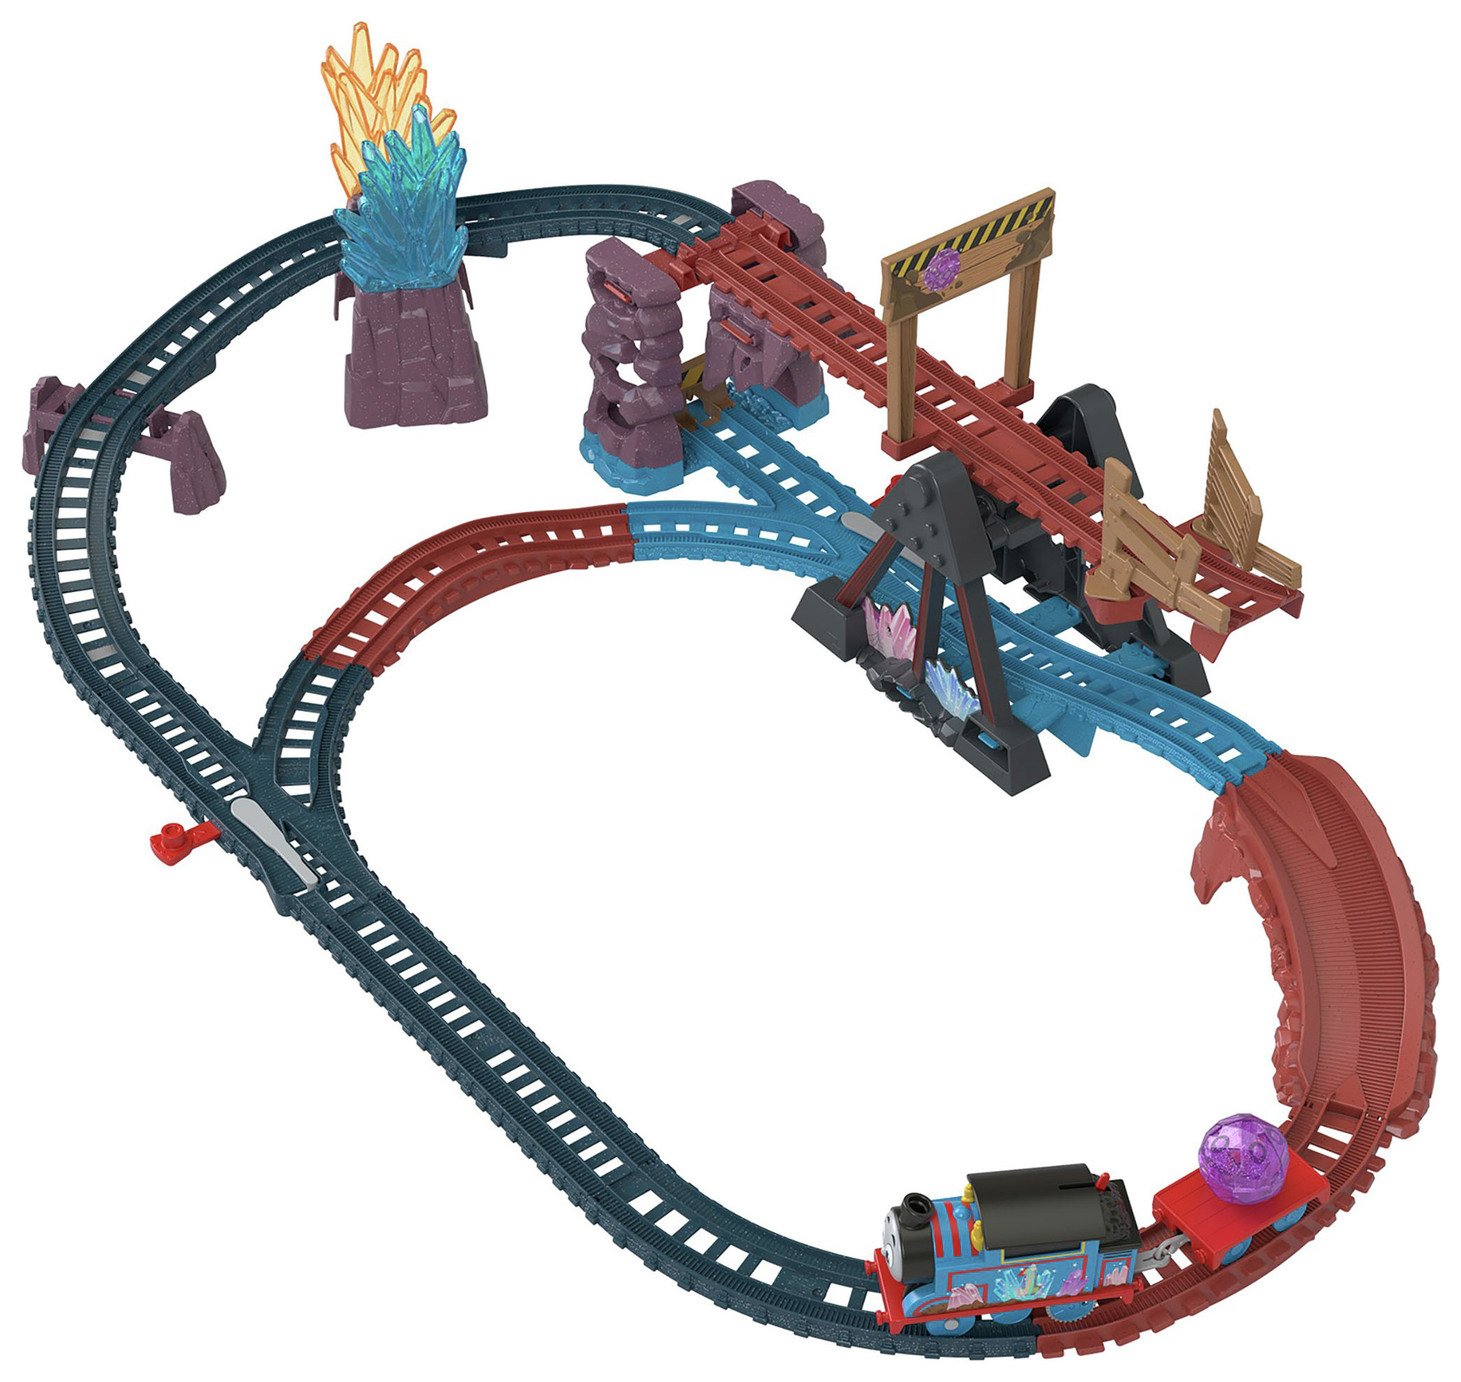 Thomas & Friends Crystal Caves Adventure Track Set review